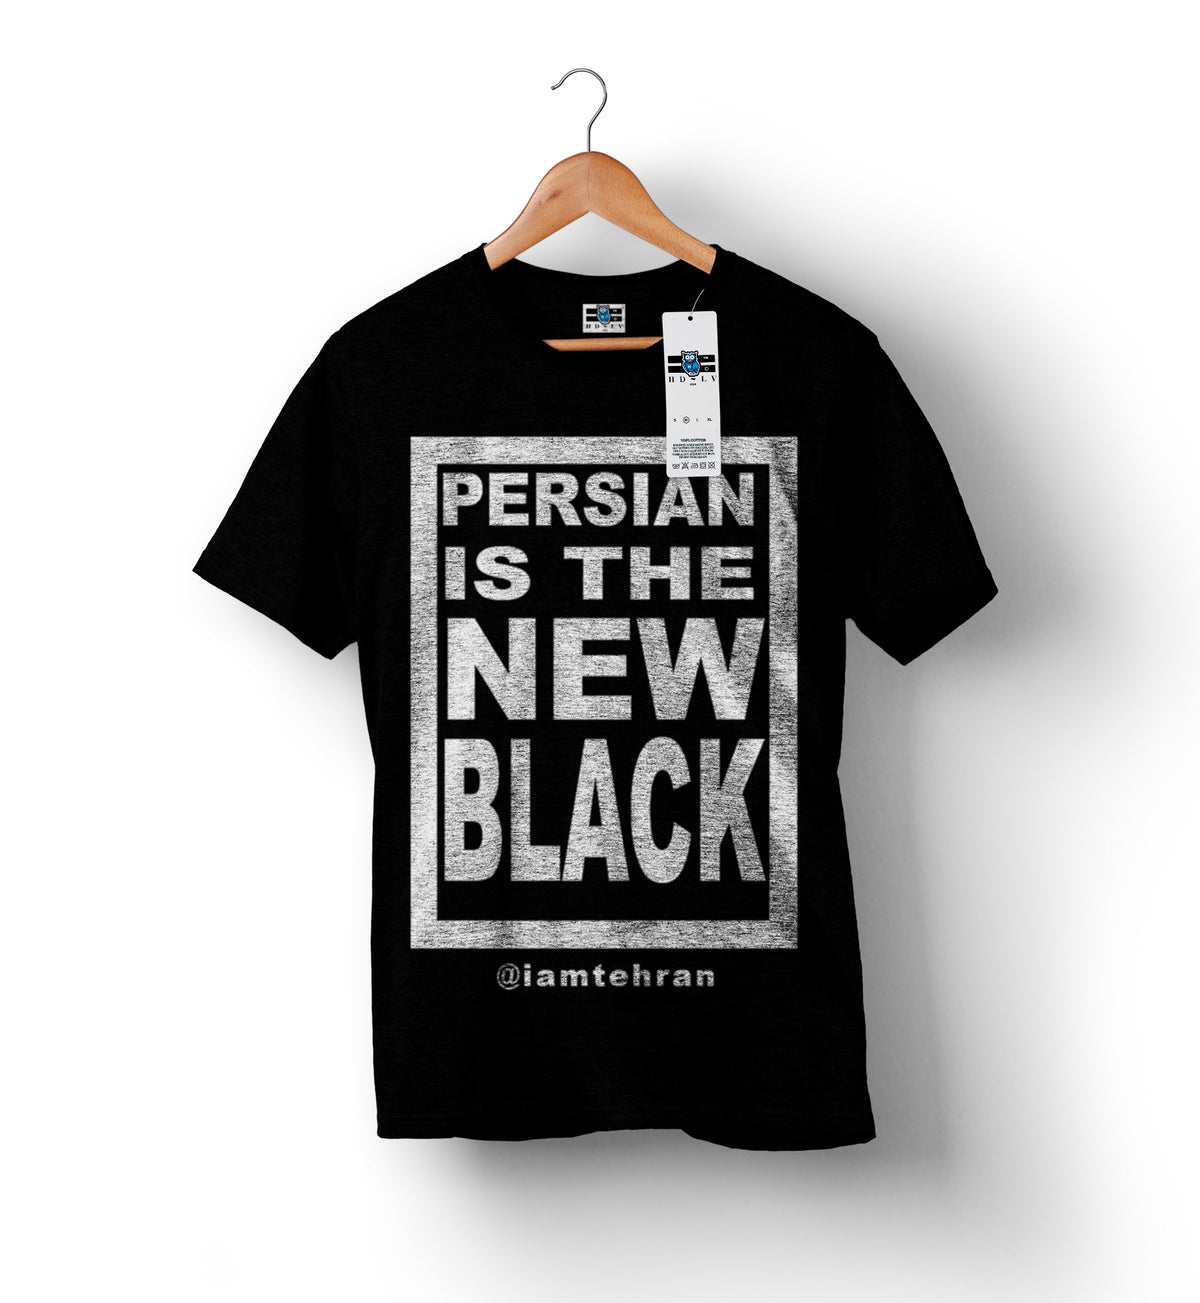 Shop and Buy Persian is The New Black Political Shirt by Tehran Von Ghasri